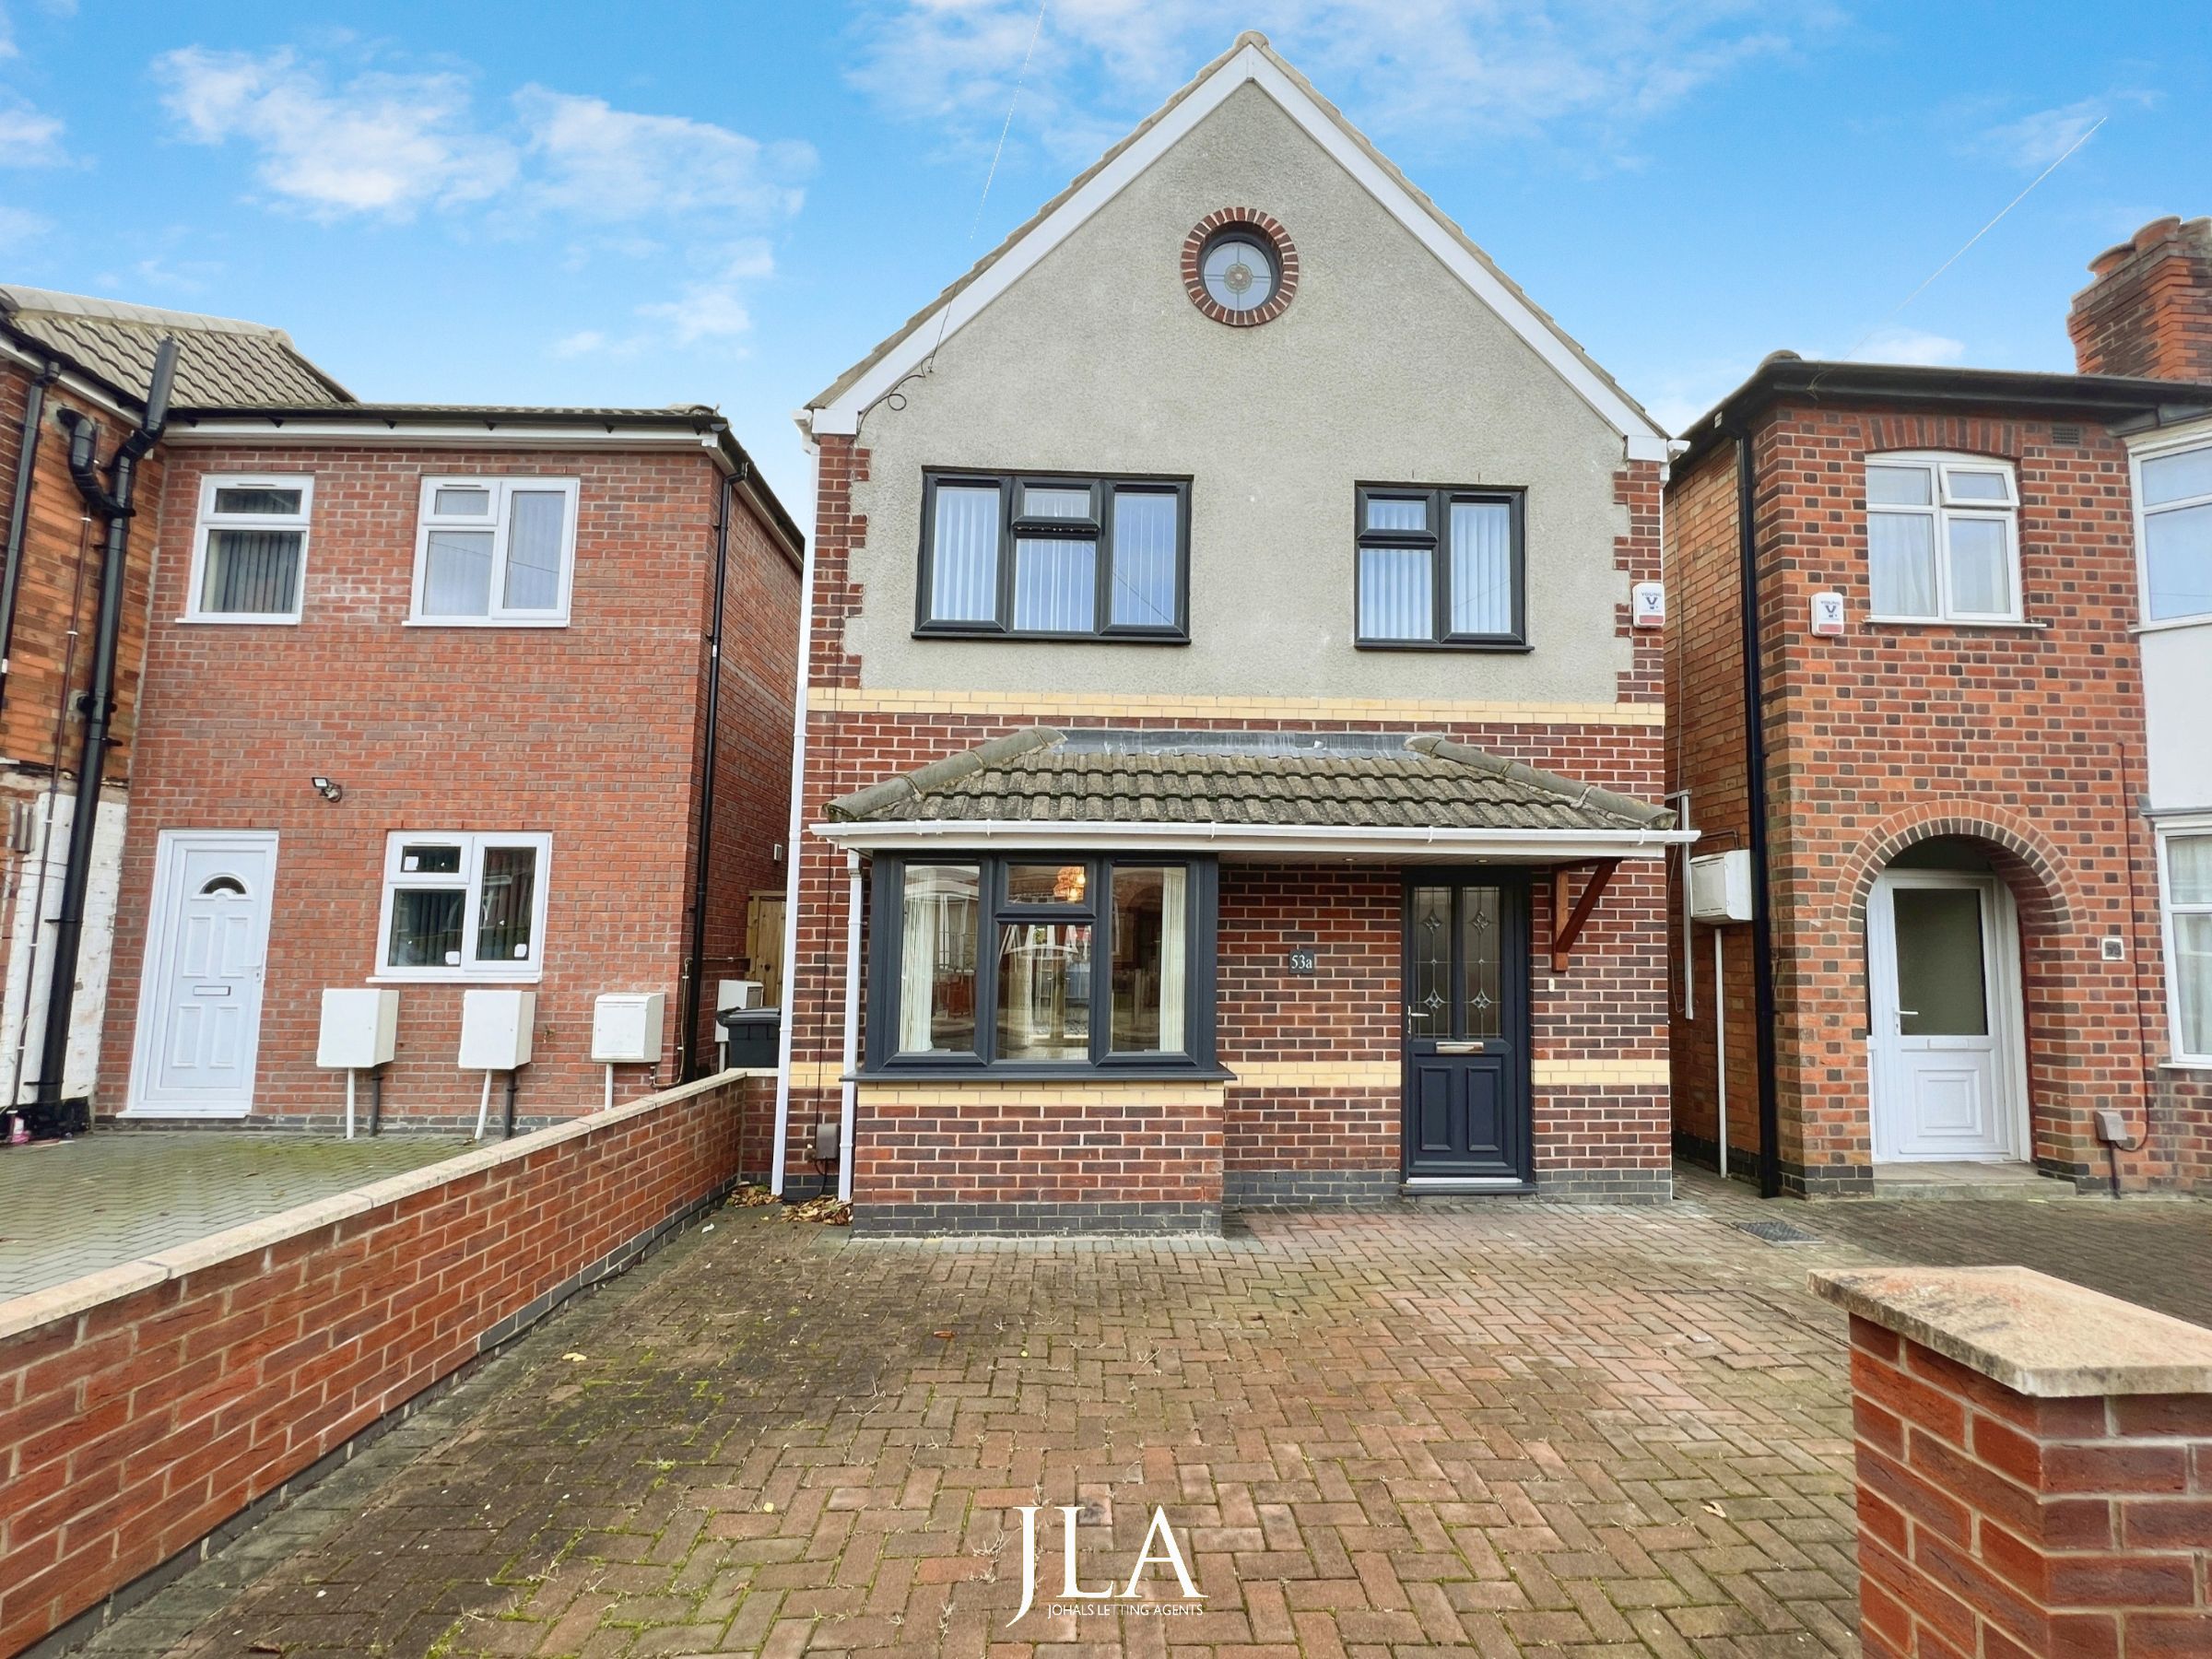 2 bed detached house to rent, Leicester  - Property Image 1